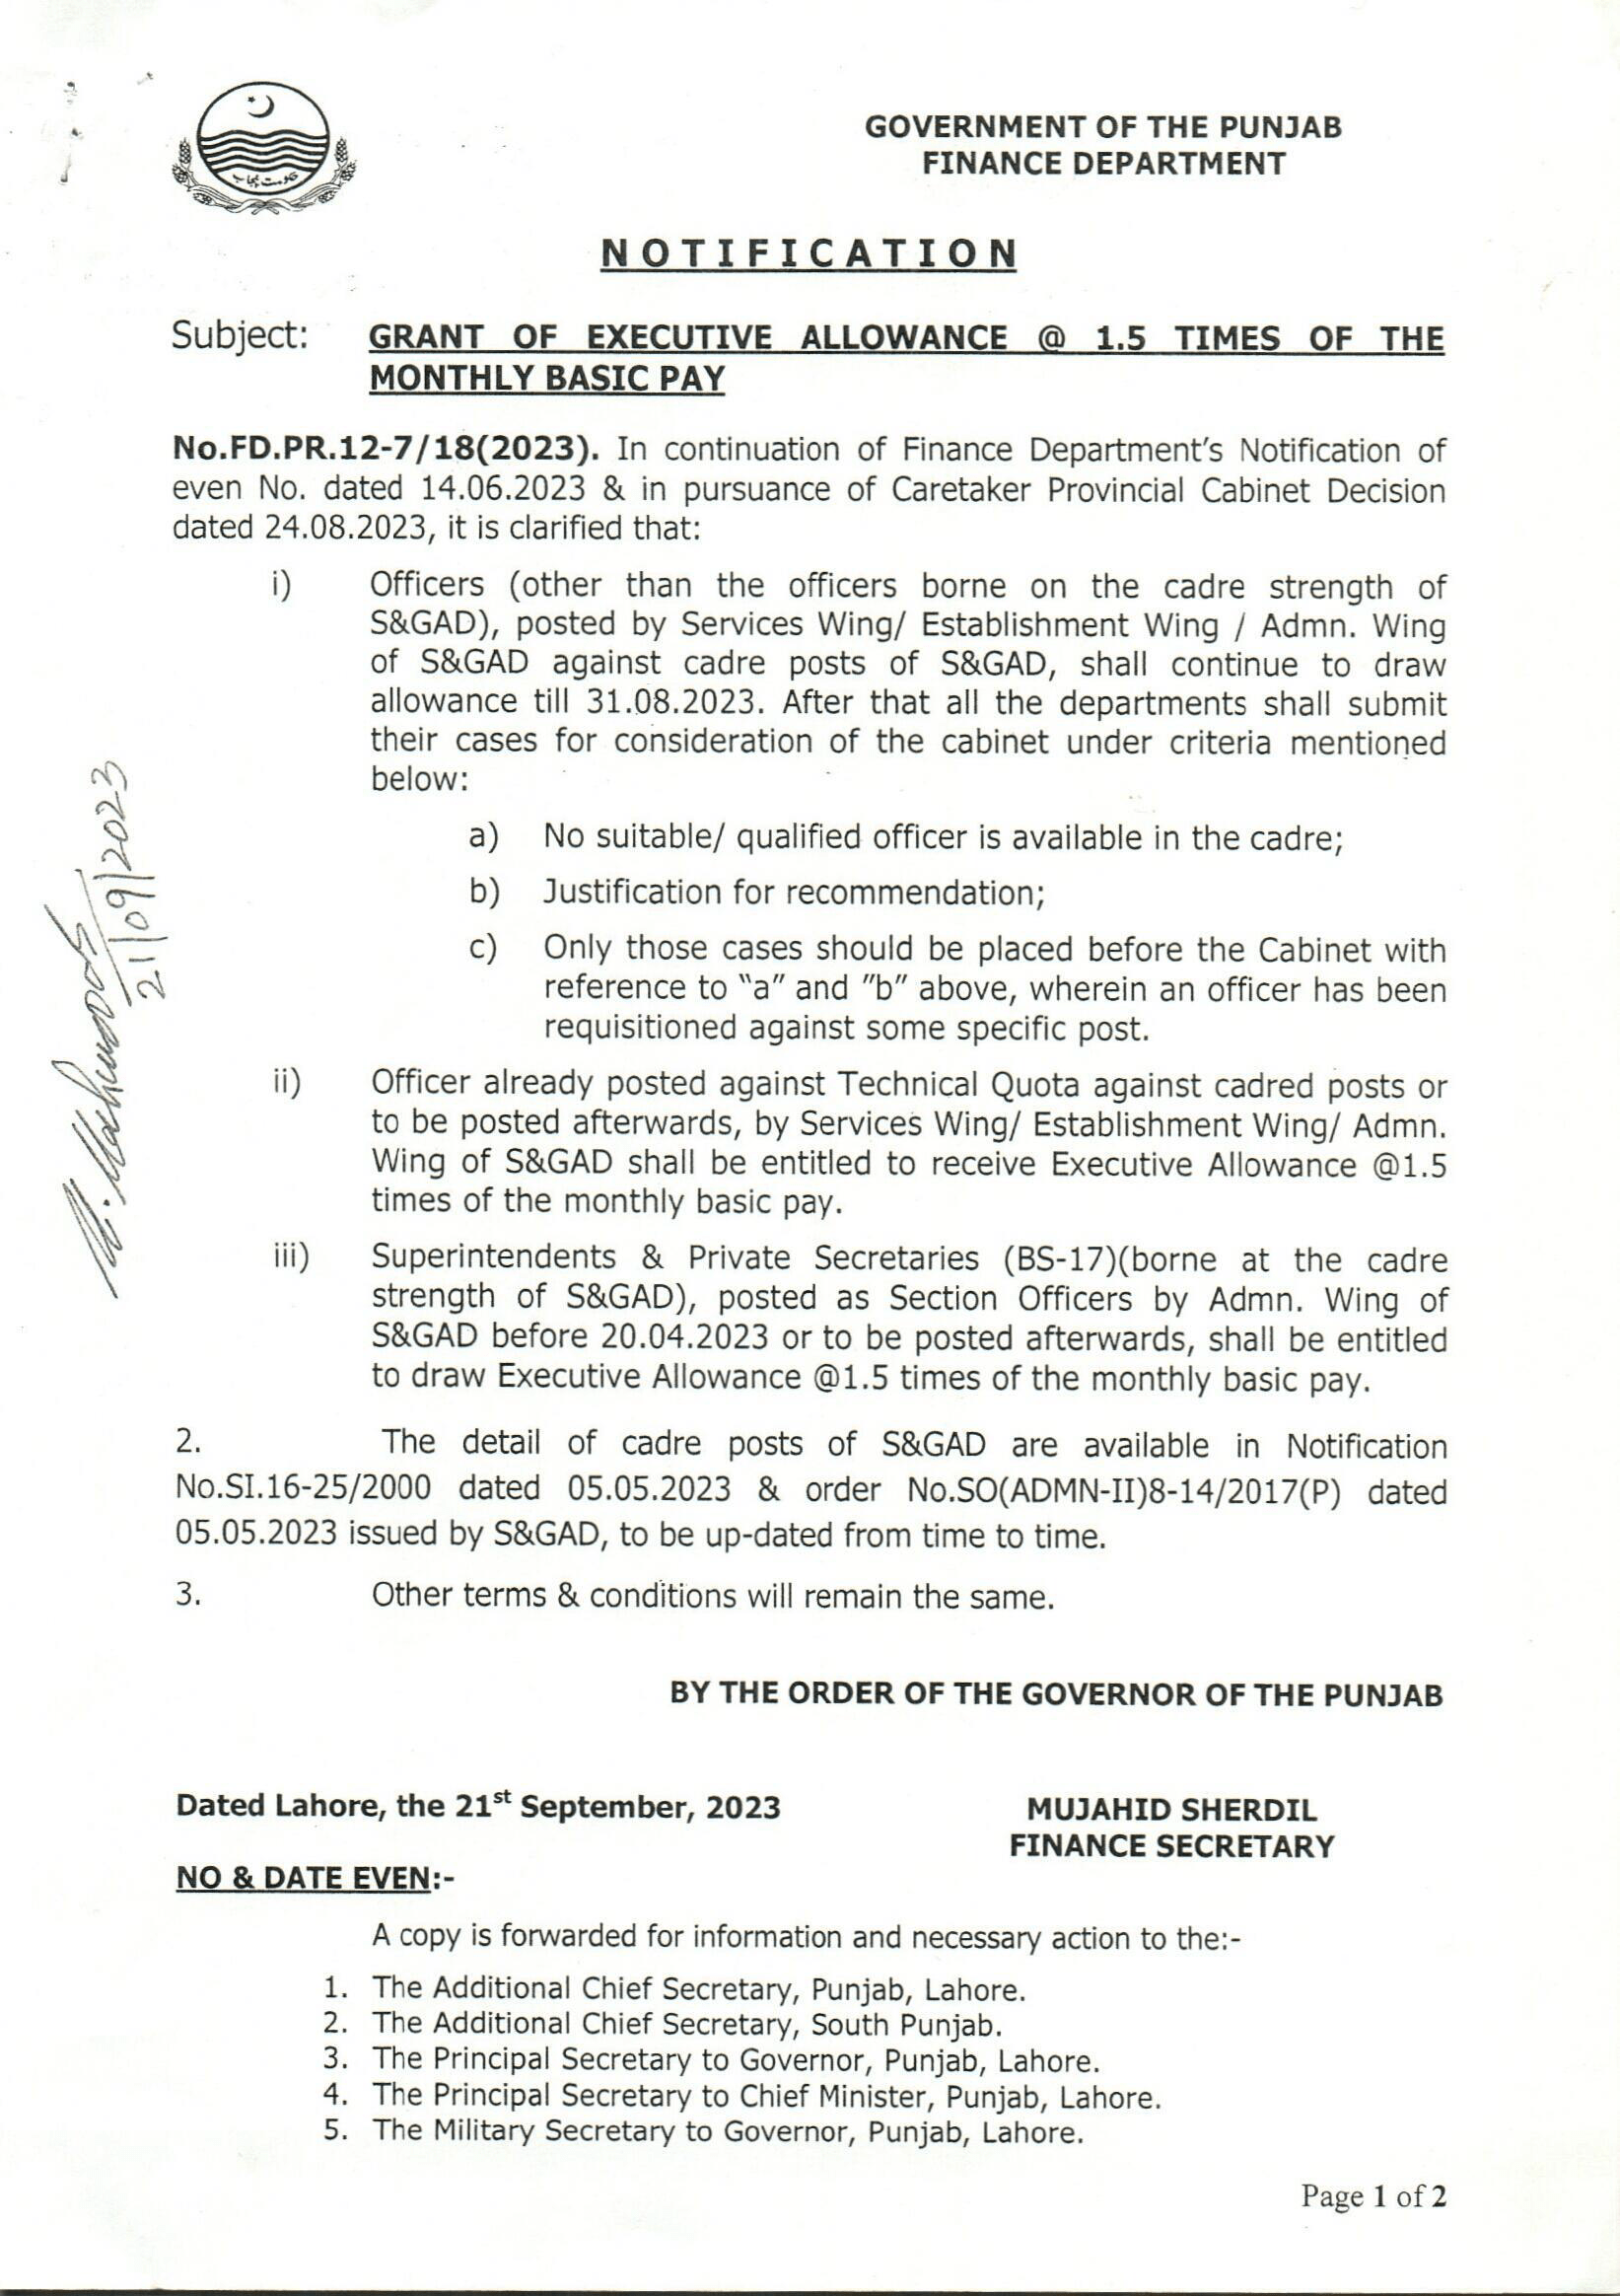 Notification Regarding Grant of Executive Allowance Add 1.5 Times of The Monthly Basic Pay